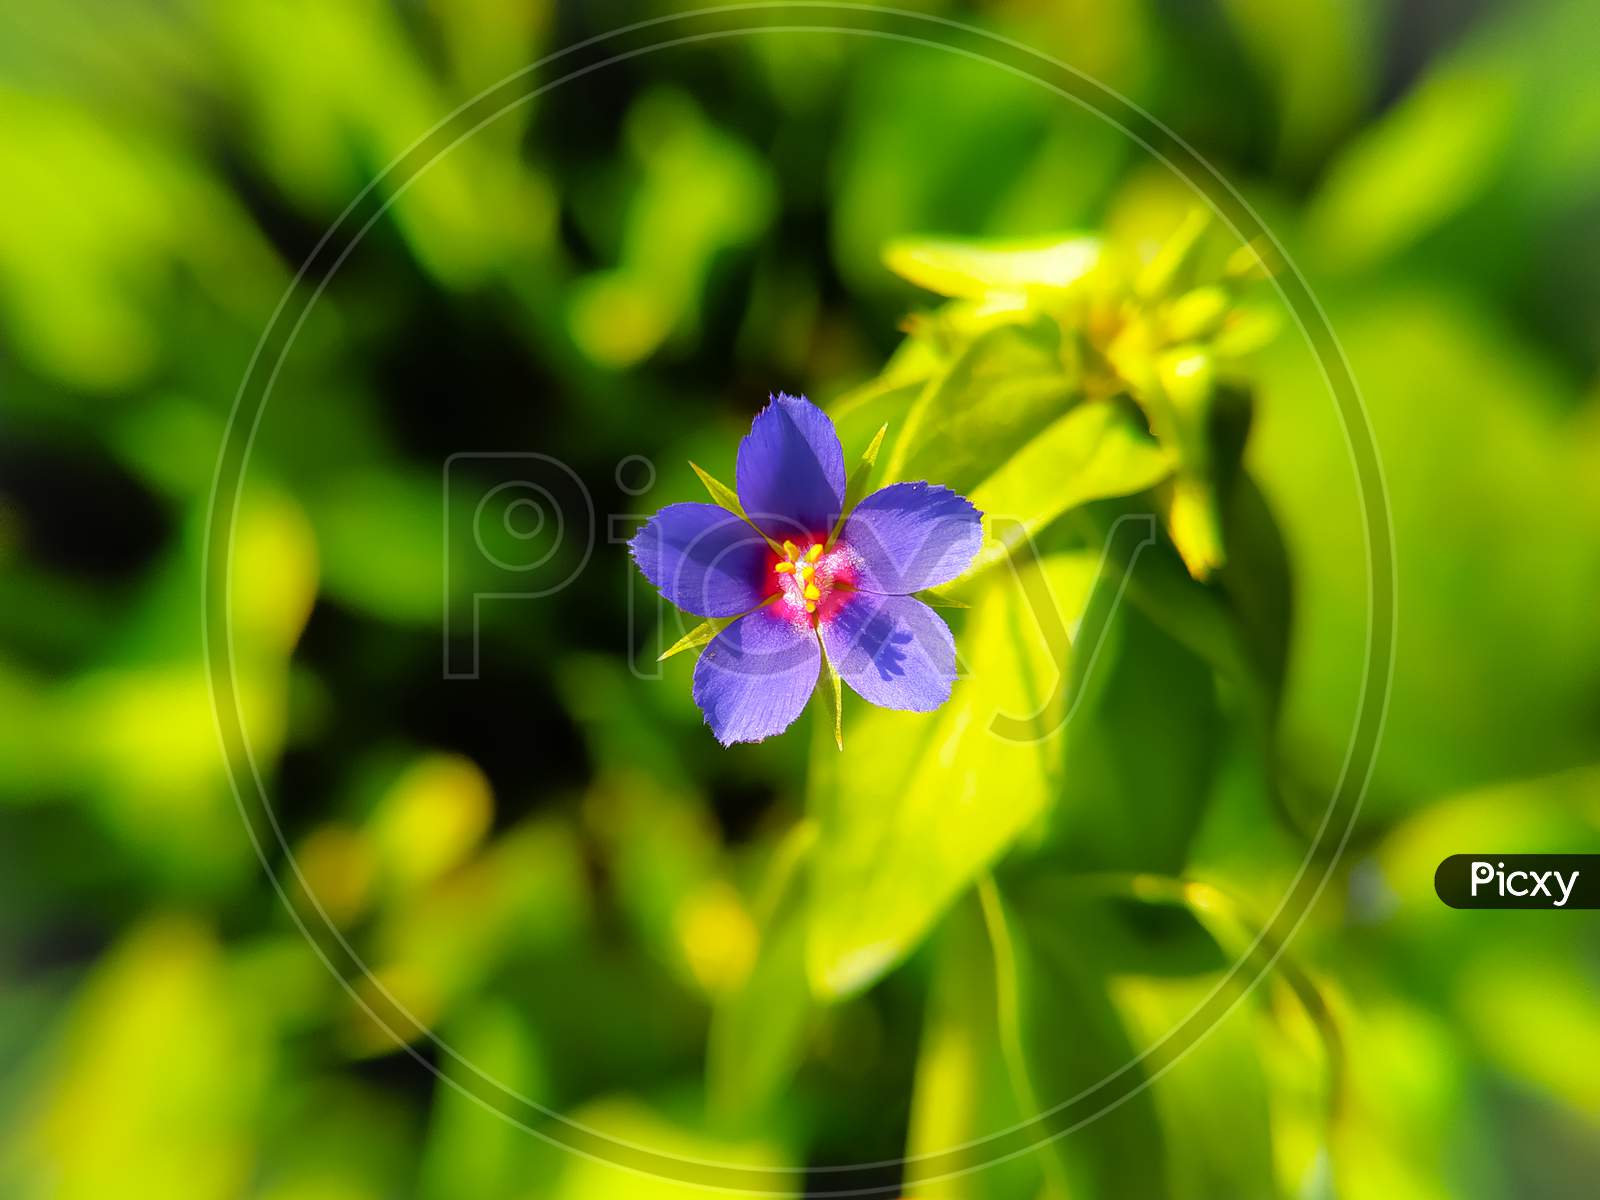 Lysimachia Foemina Is Commonly Known As Blue Pimpernel